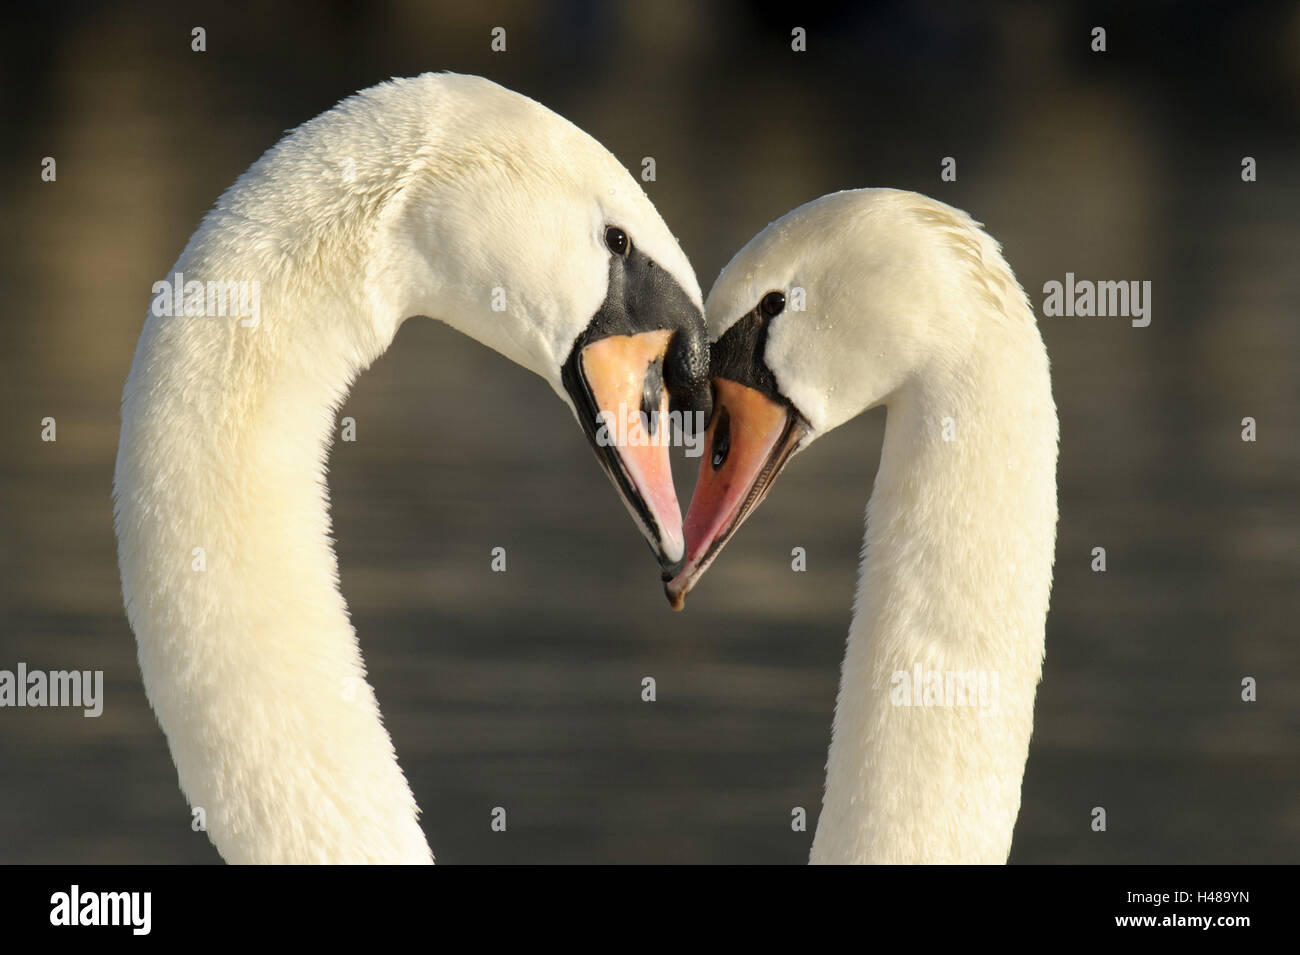 Hump swans, courtship display, close-up, Stock Photo